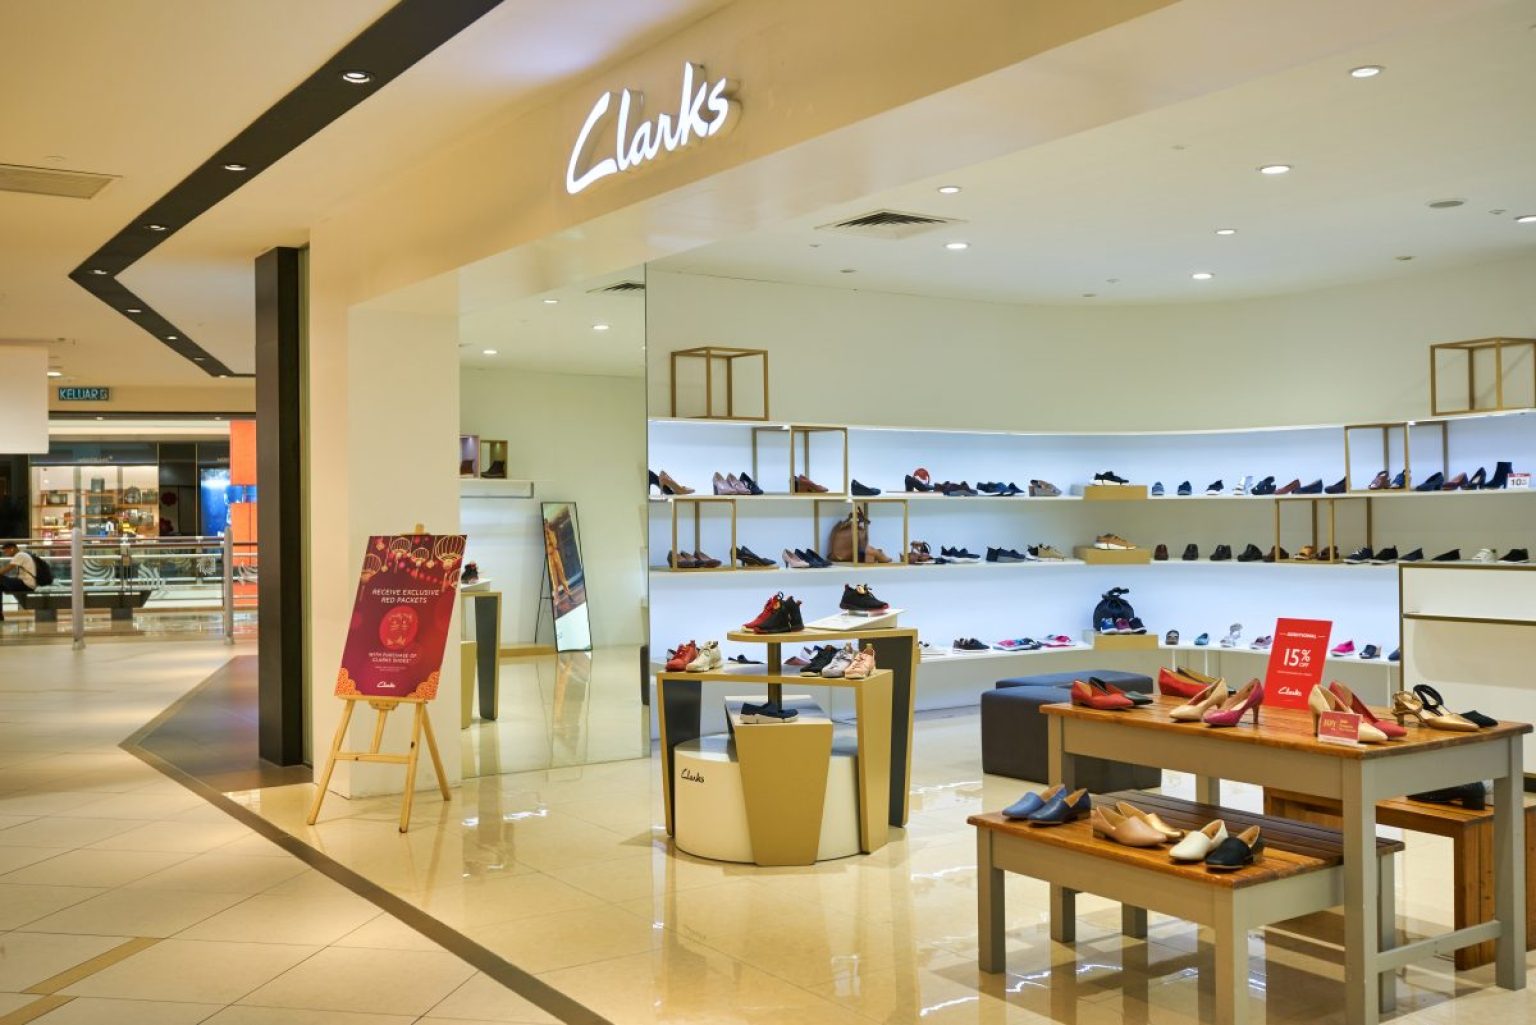 clarks-shoe-size-chart-how-to-fit-clarks-shoes-the-shoe-box-nyc